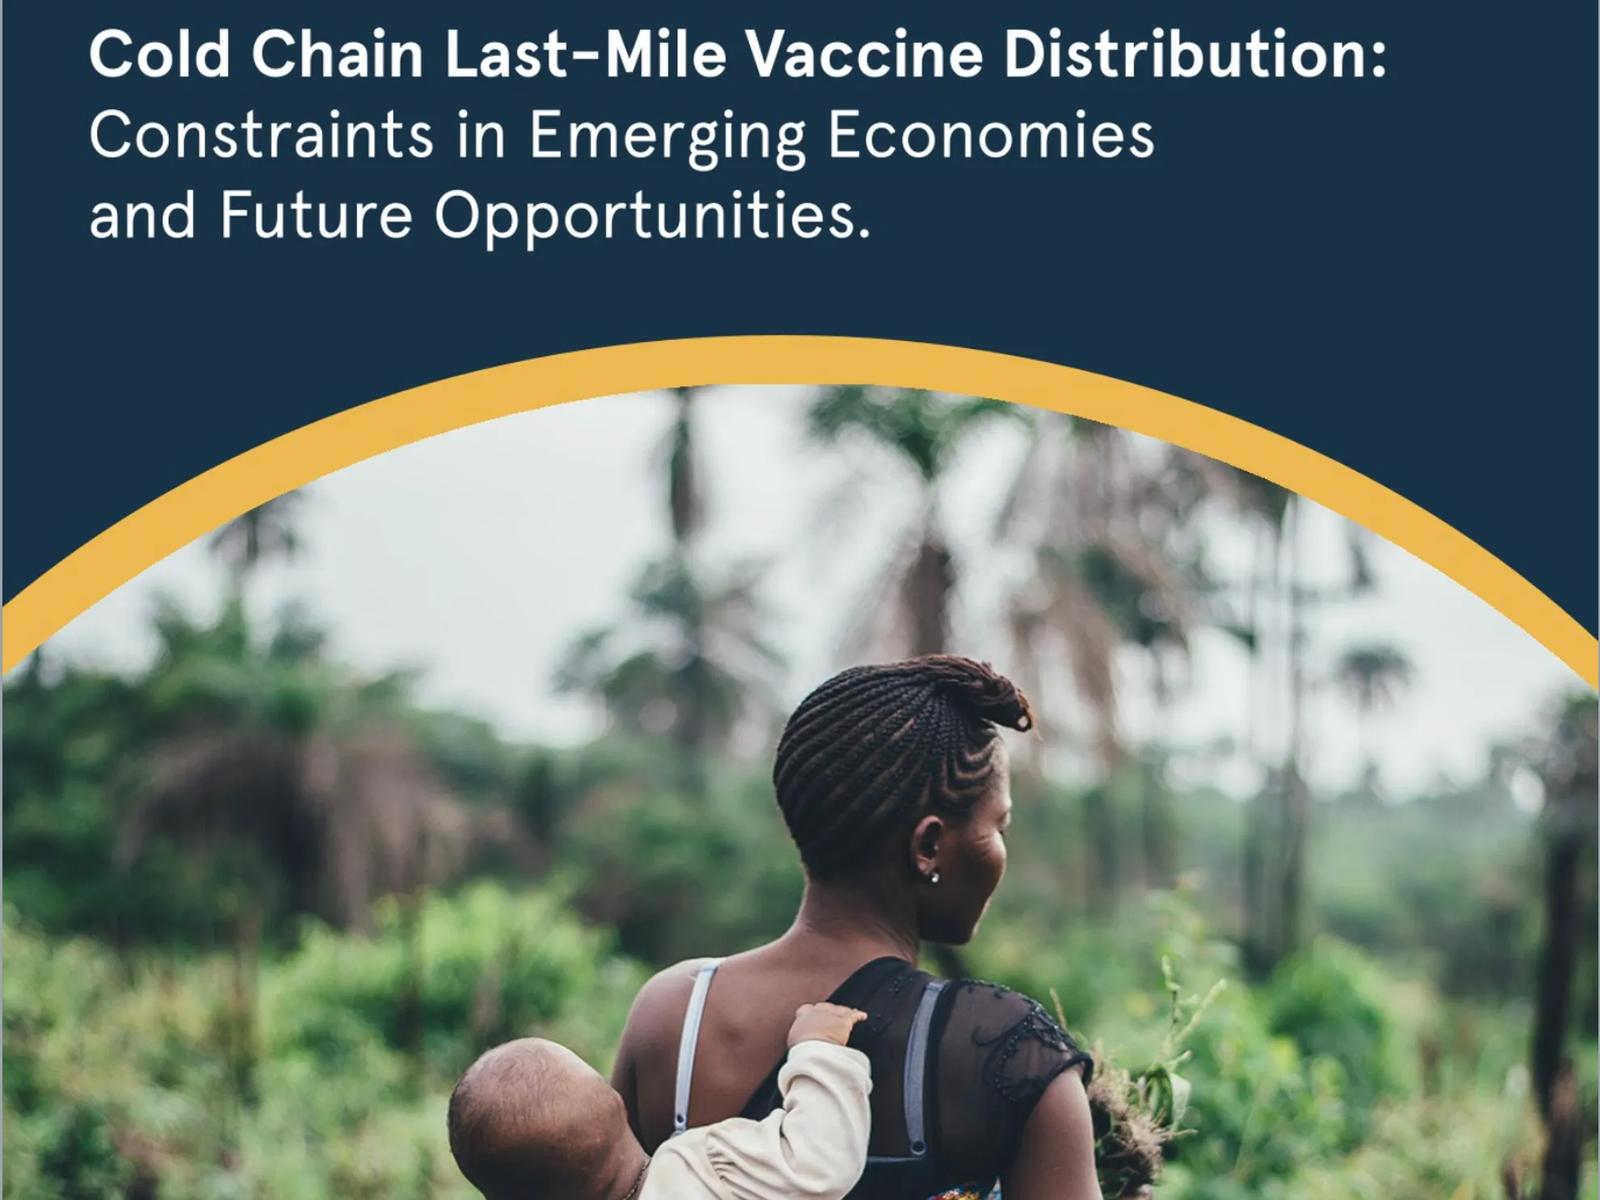 Research - Cold-Chain, Last-Mile Vaccine Distribution in Africa